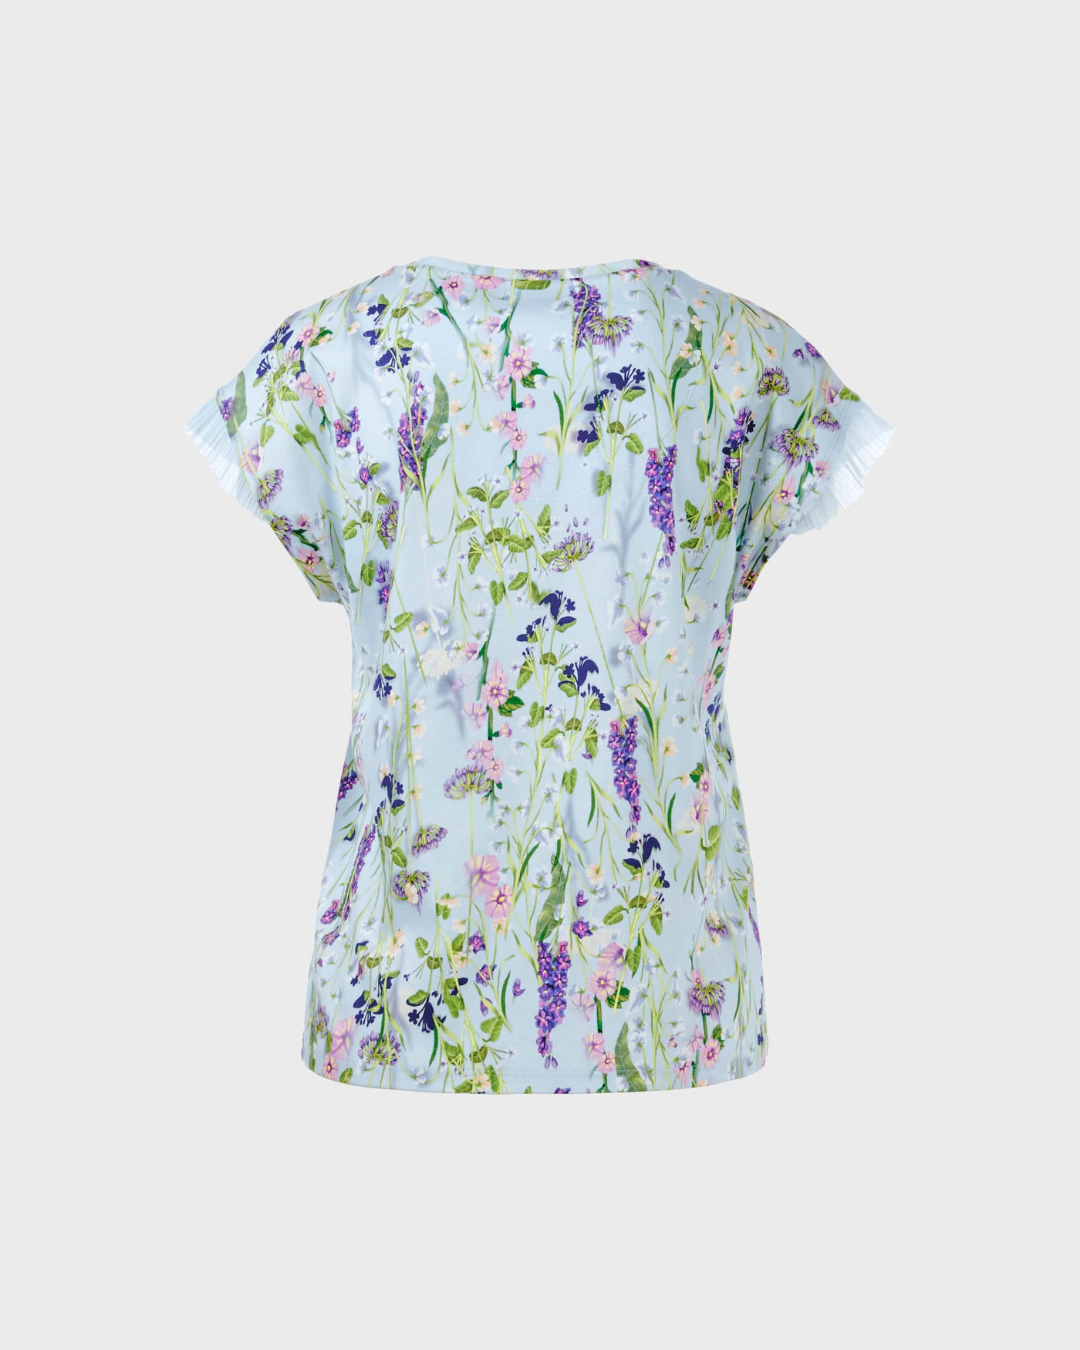 T-shirt with floral design